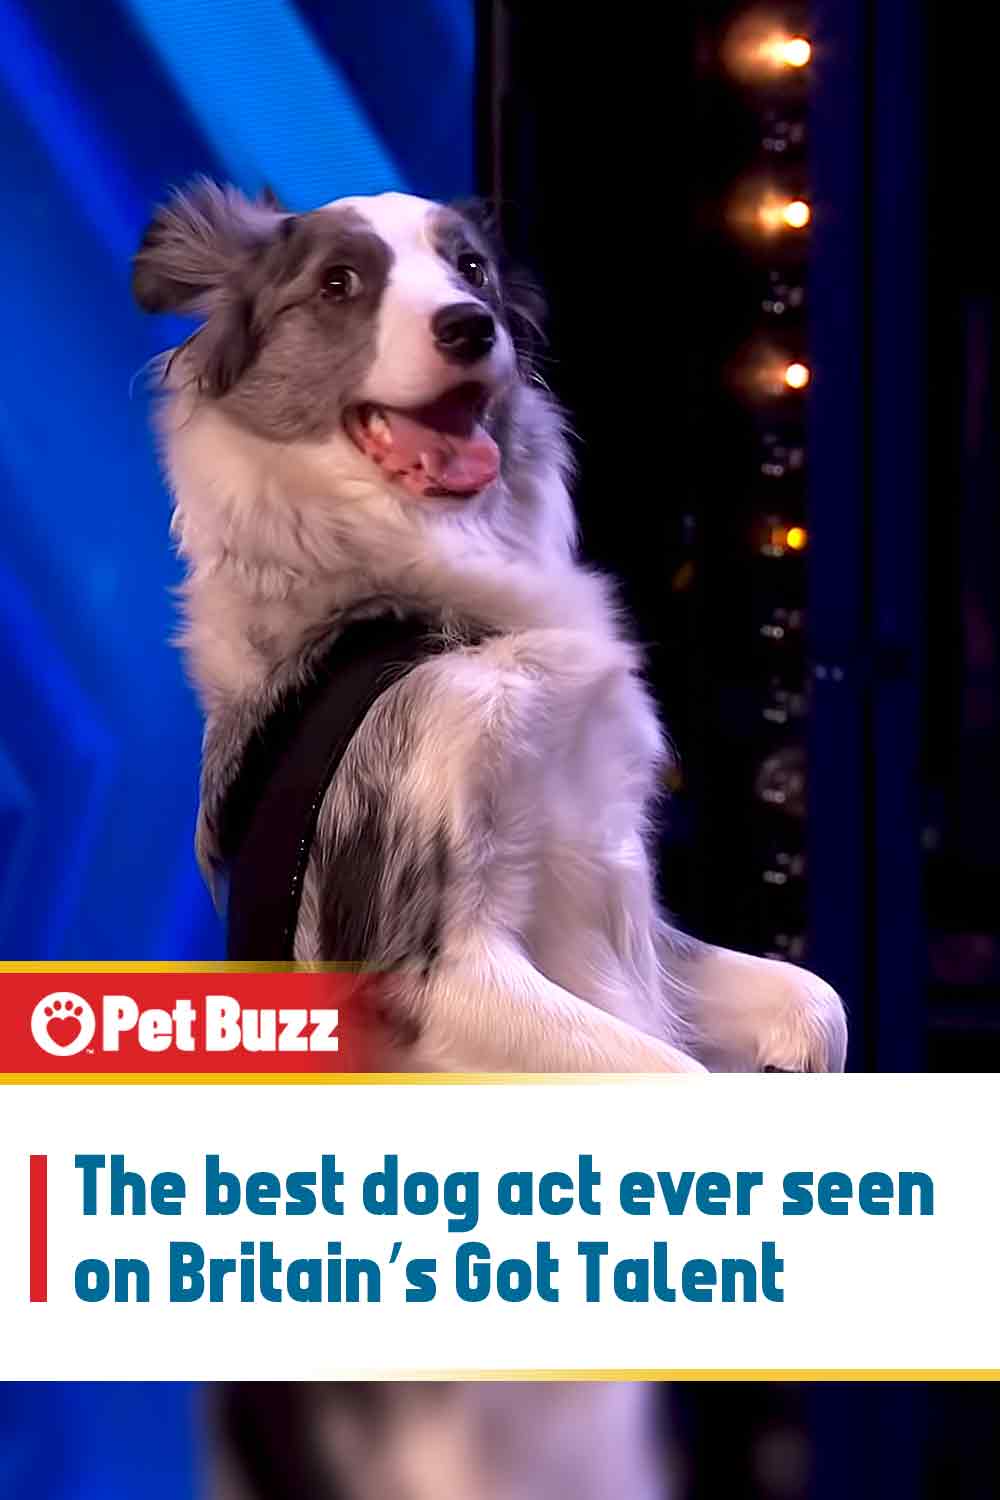 The best dog act ever seen on Britain’s Got Talent